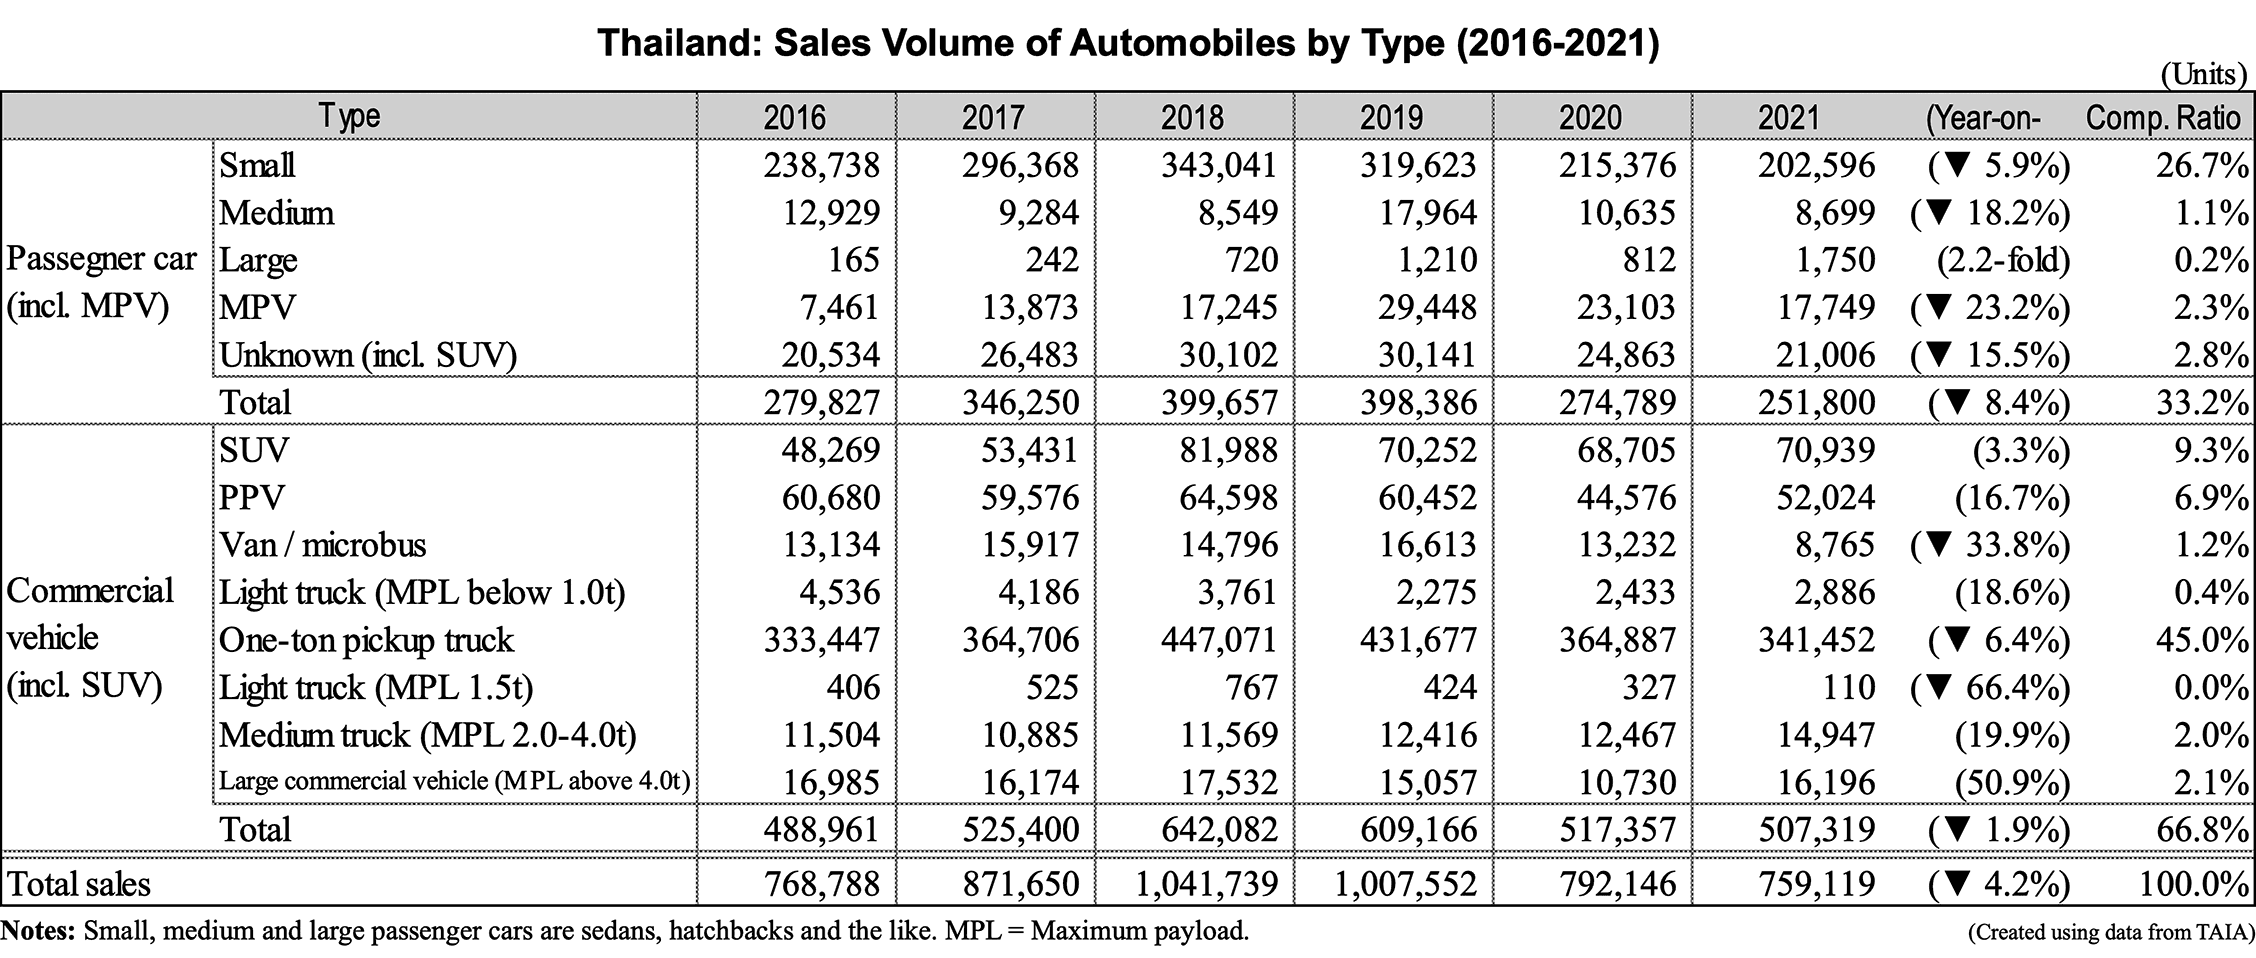 Table: Thailand: Sales Volume of Automobiles by Type (2016-2021)